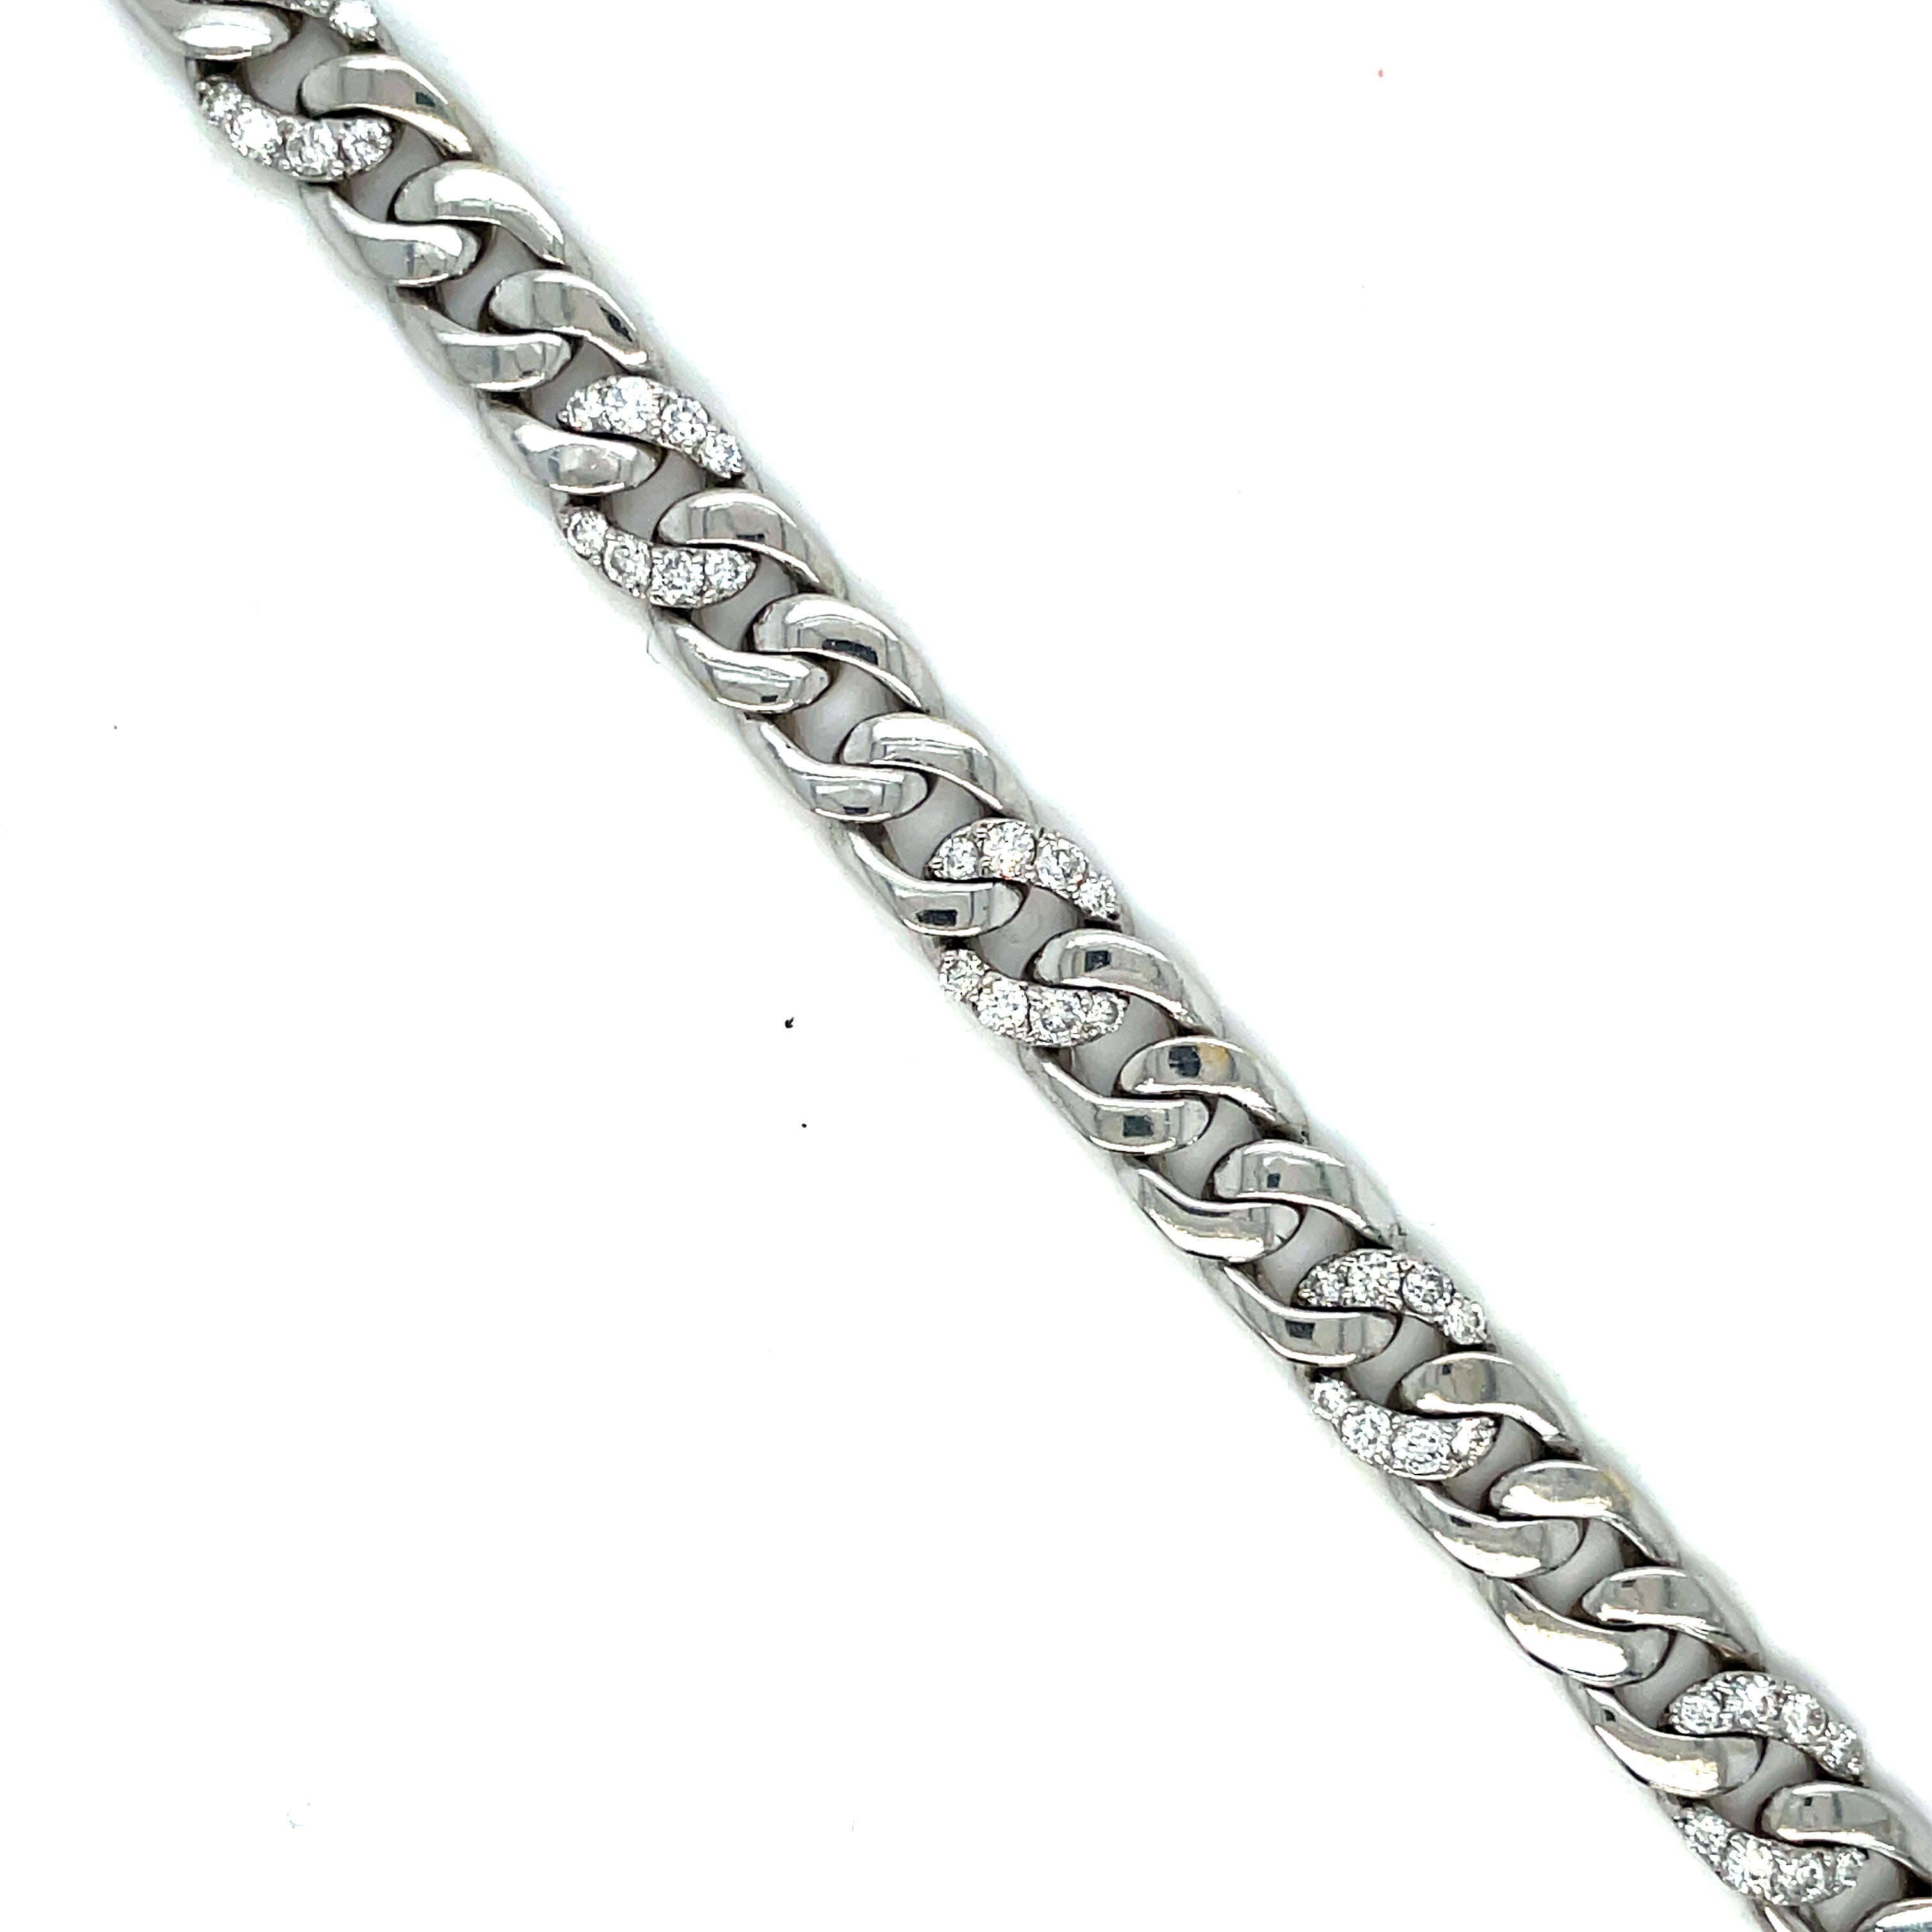 This beautiful 18k white gold bracelet features glittering diamonds set in an alternating pattern. With 1.75 cts in total, the high-quality diamonds add luxe sparkle to ensembles. Perfect for a special occasion or everyday glamour